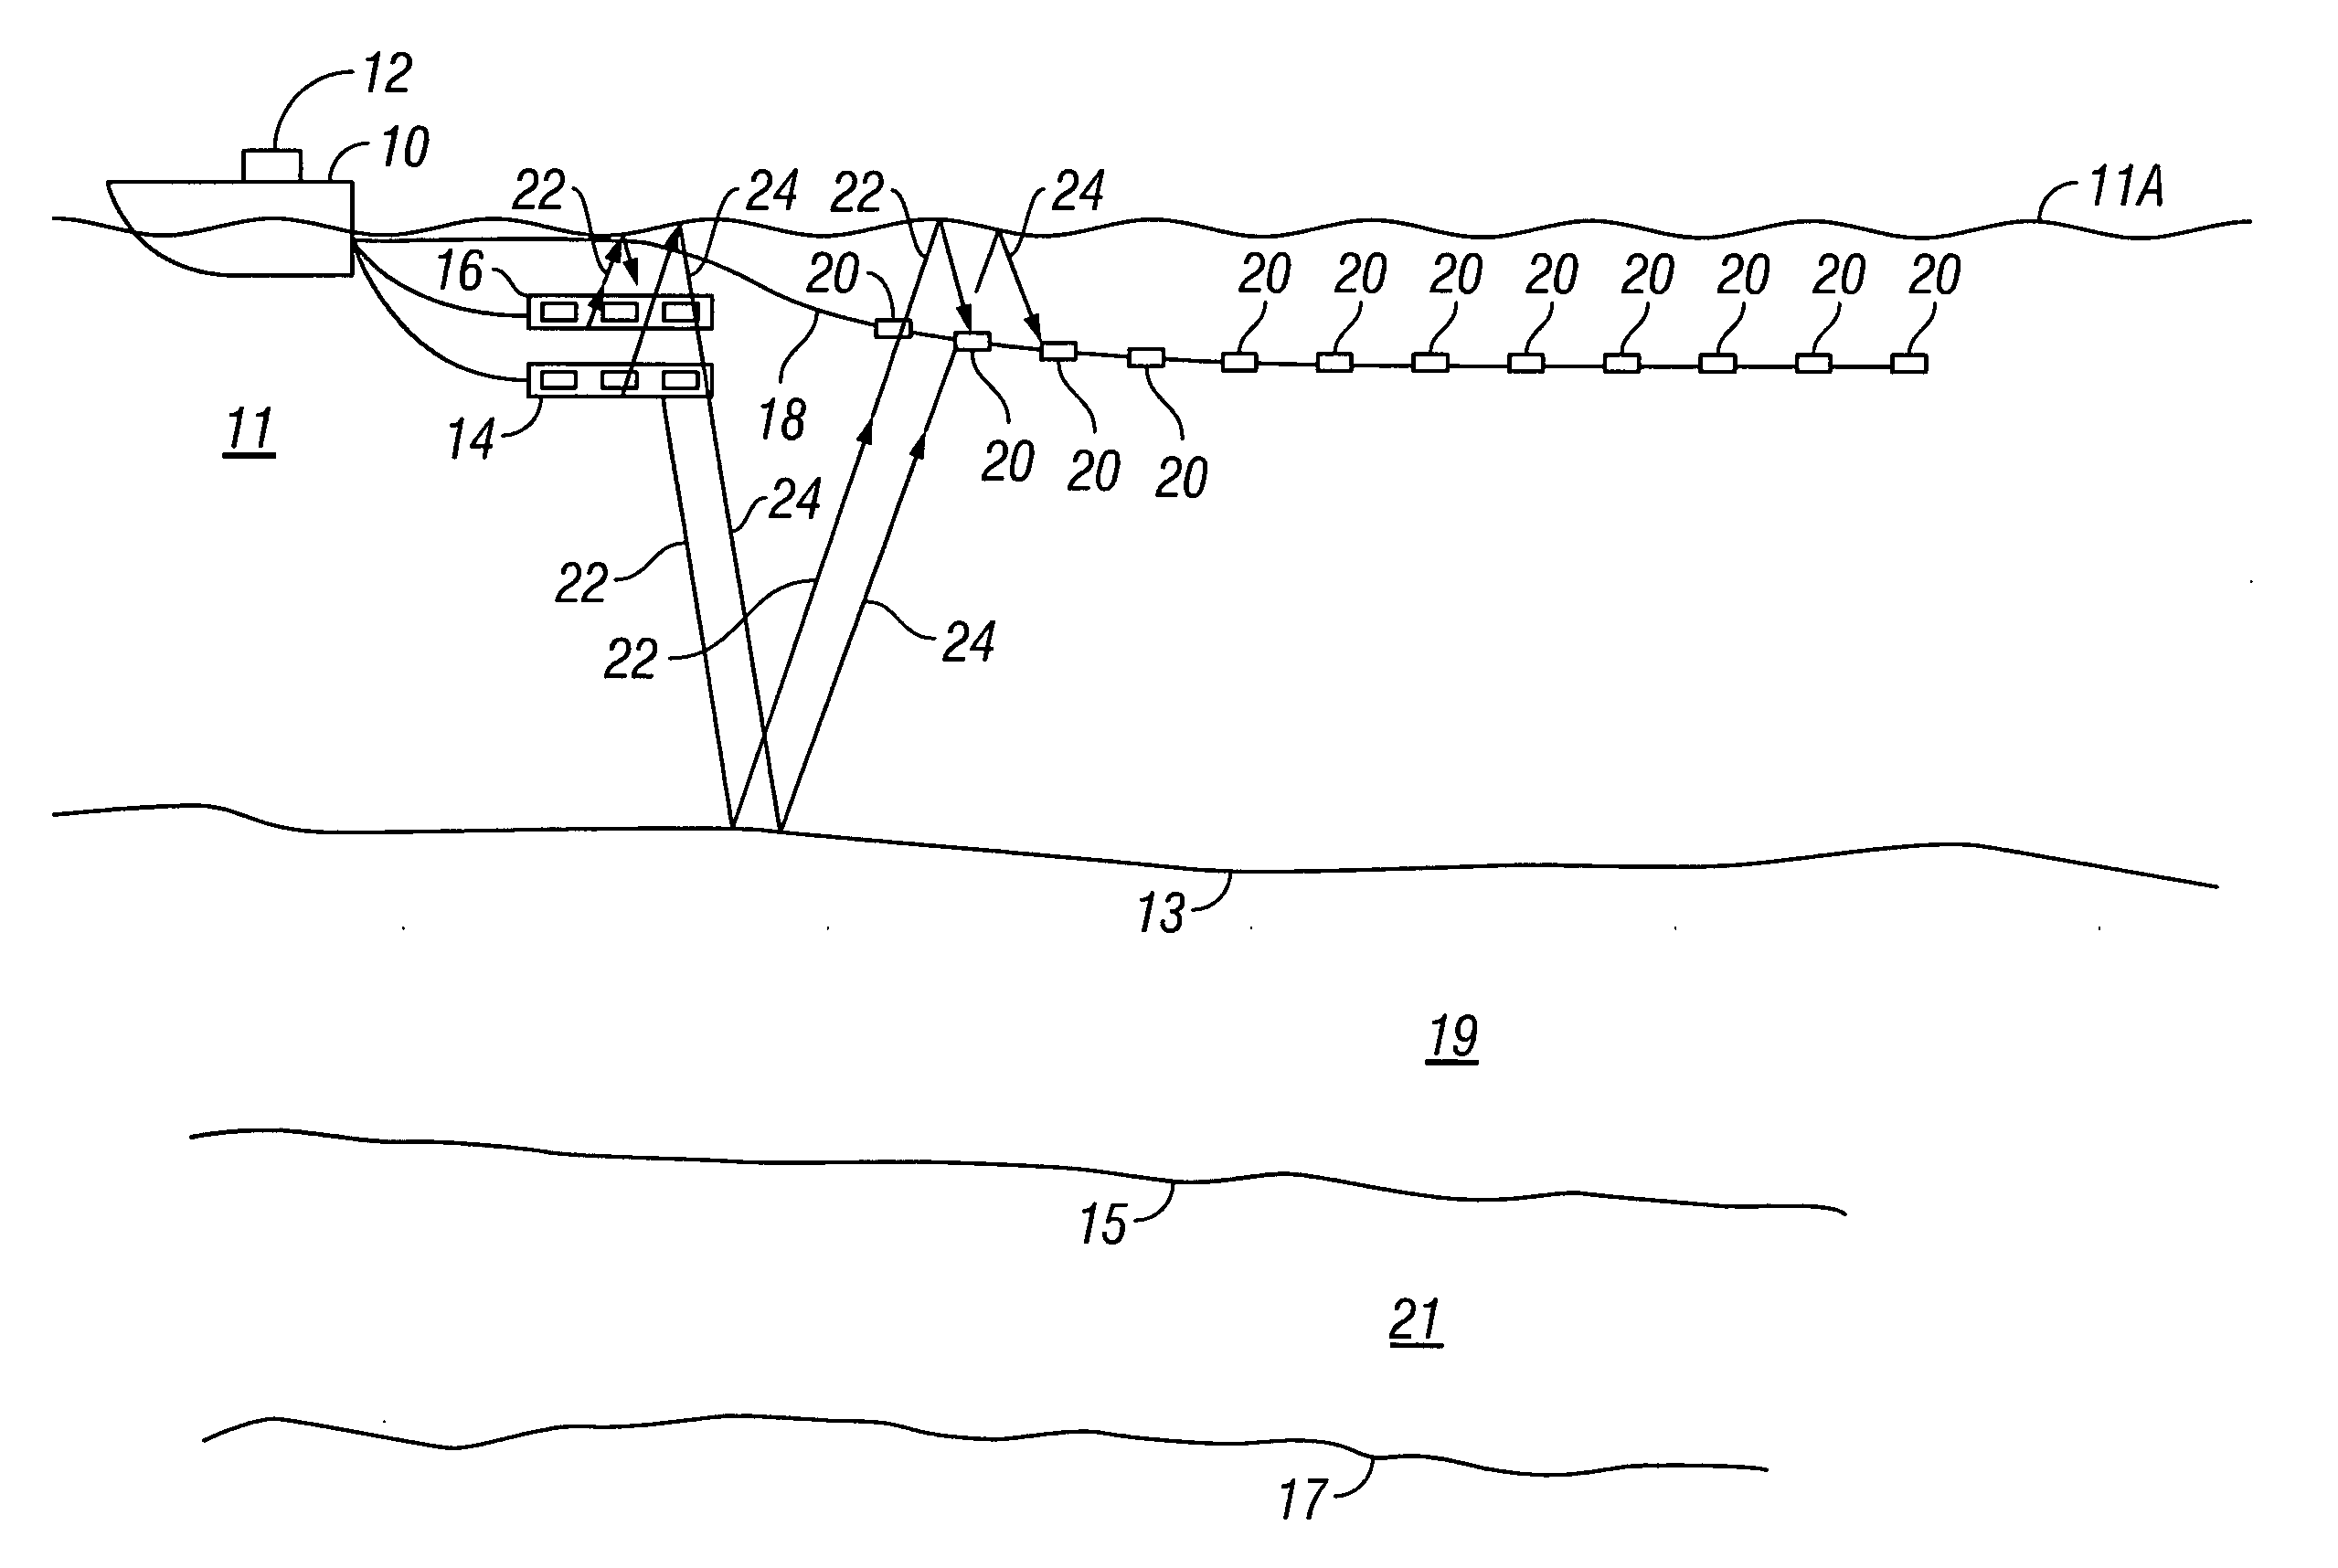 Method for aquiring and processing marine seismic data to extract and constructively use the up-going and down-going wave-fields emitted by the source(s)